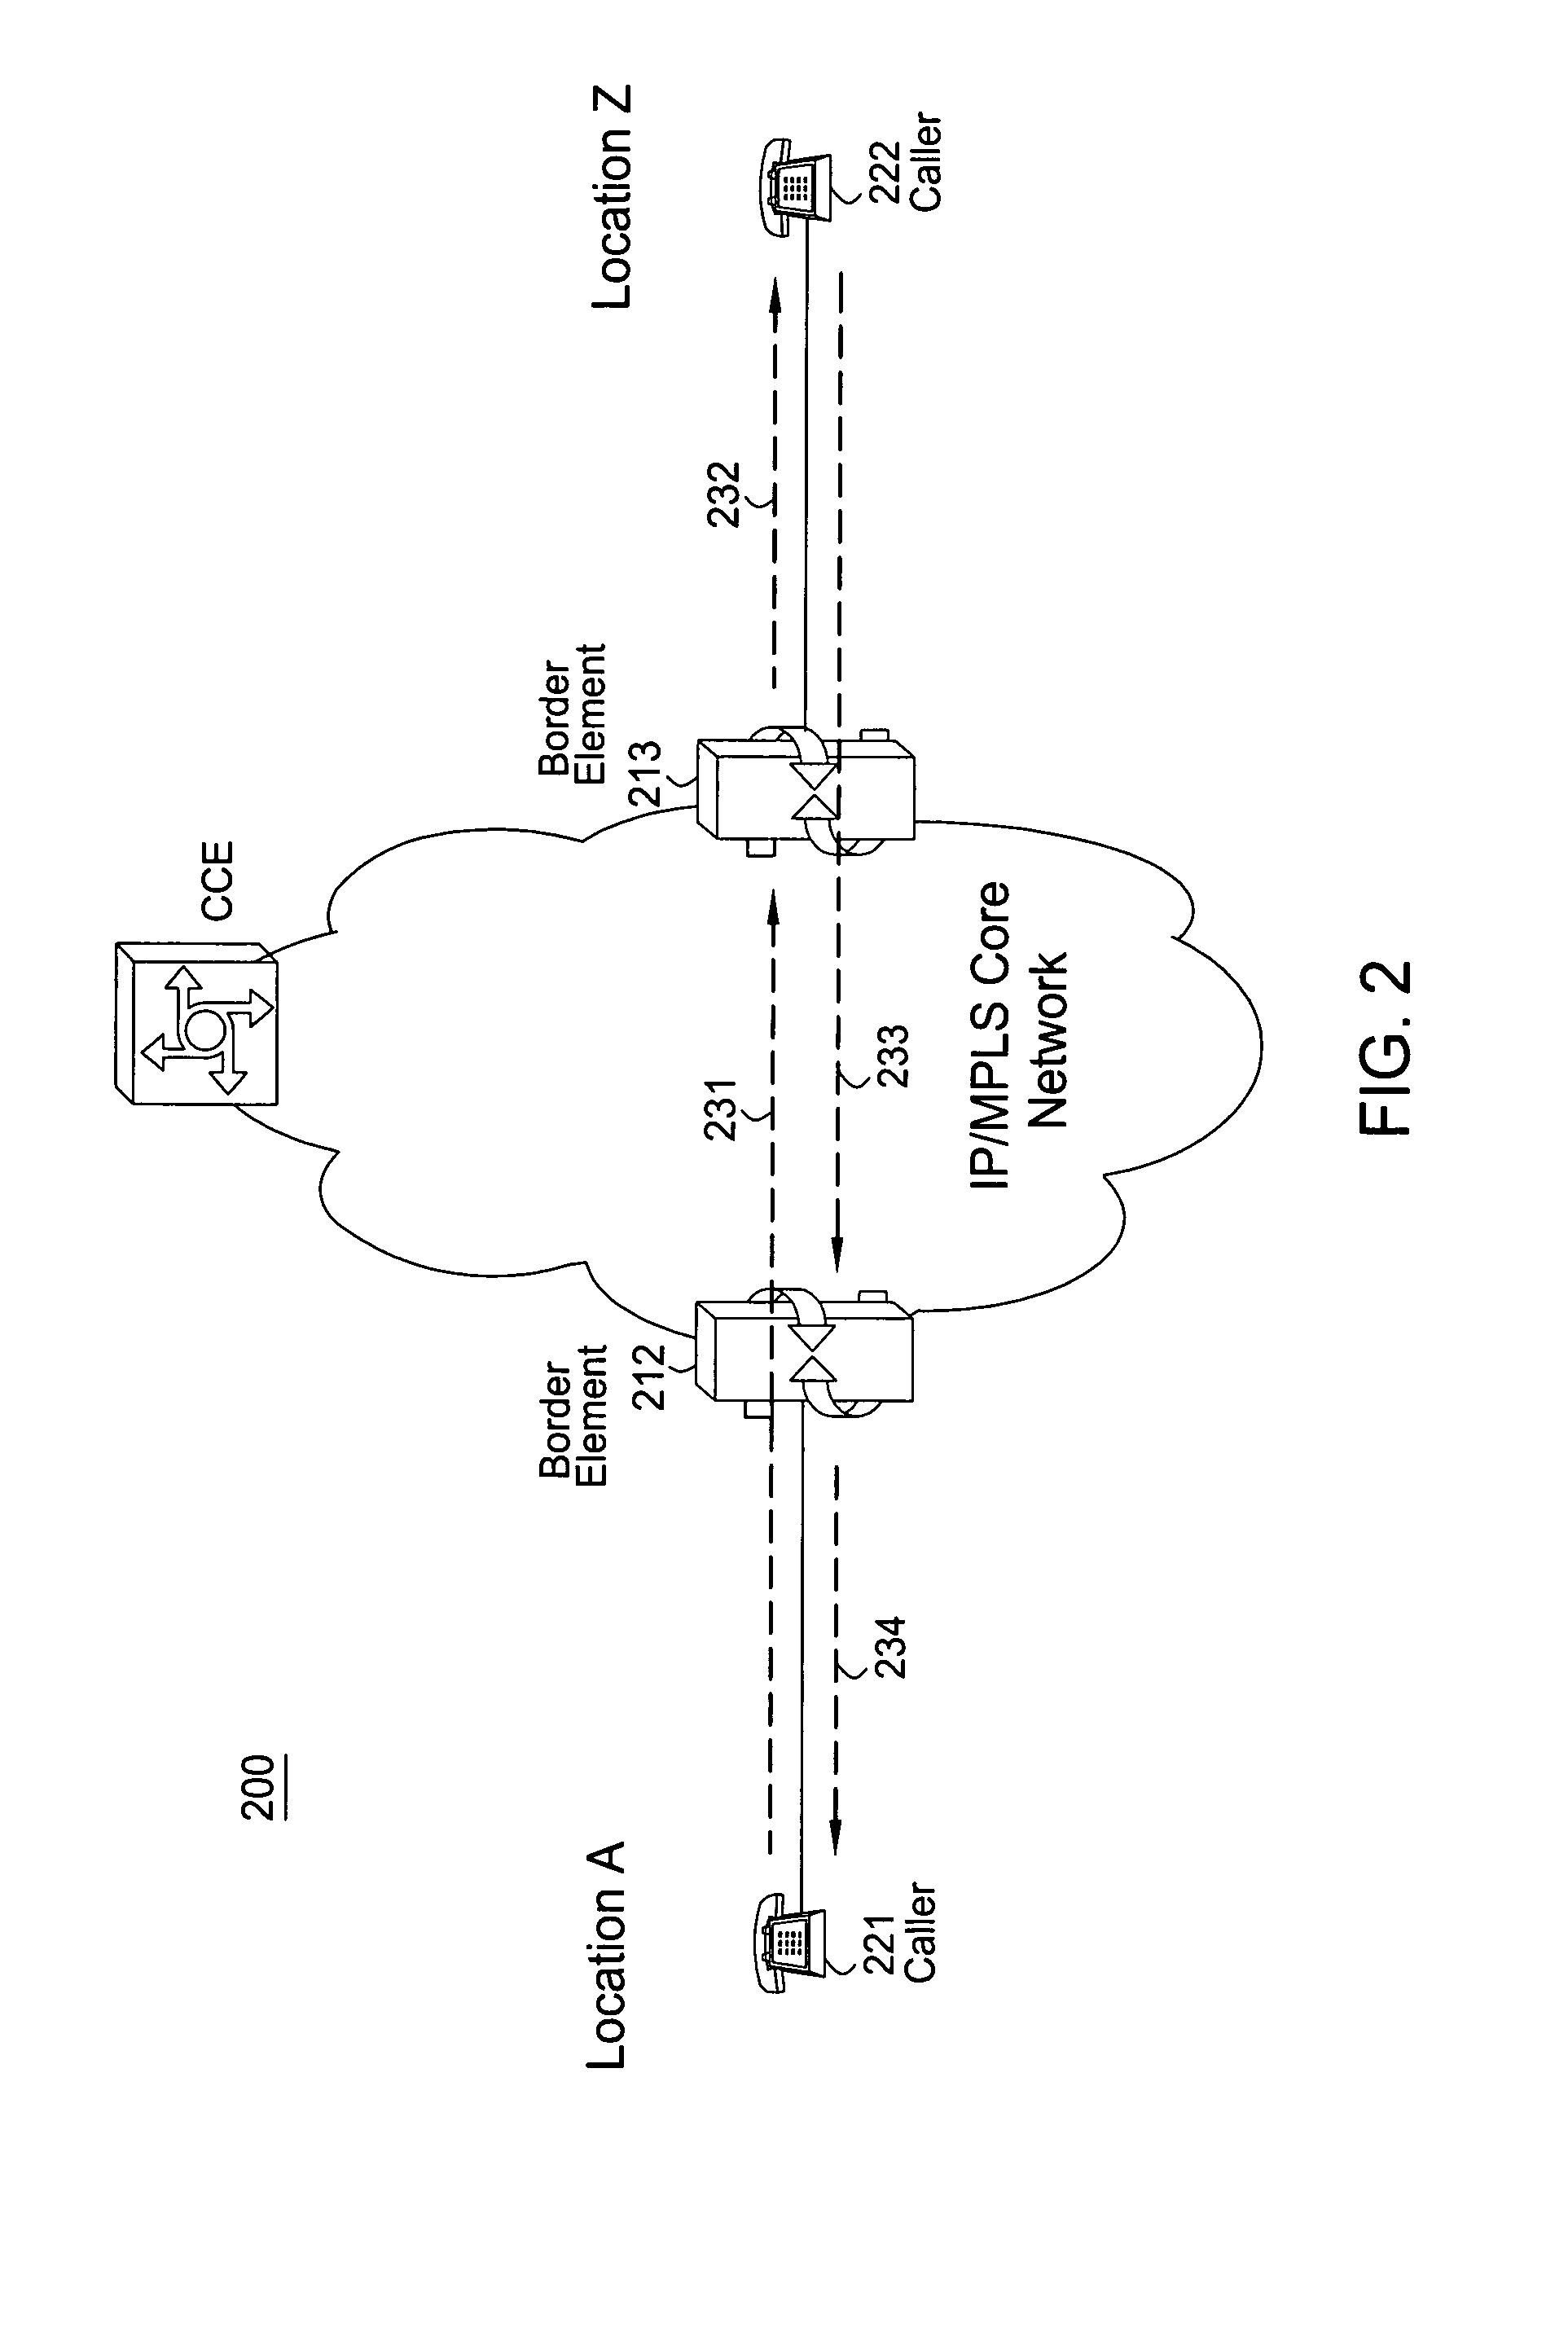 Method and apparatus for dynamically providing comfort noise